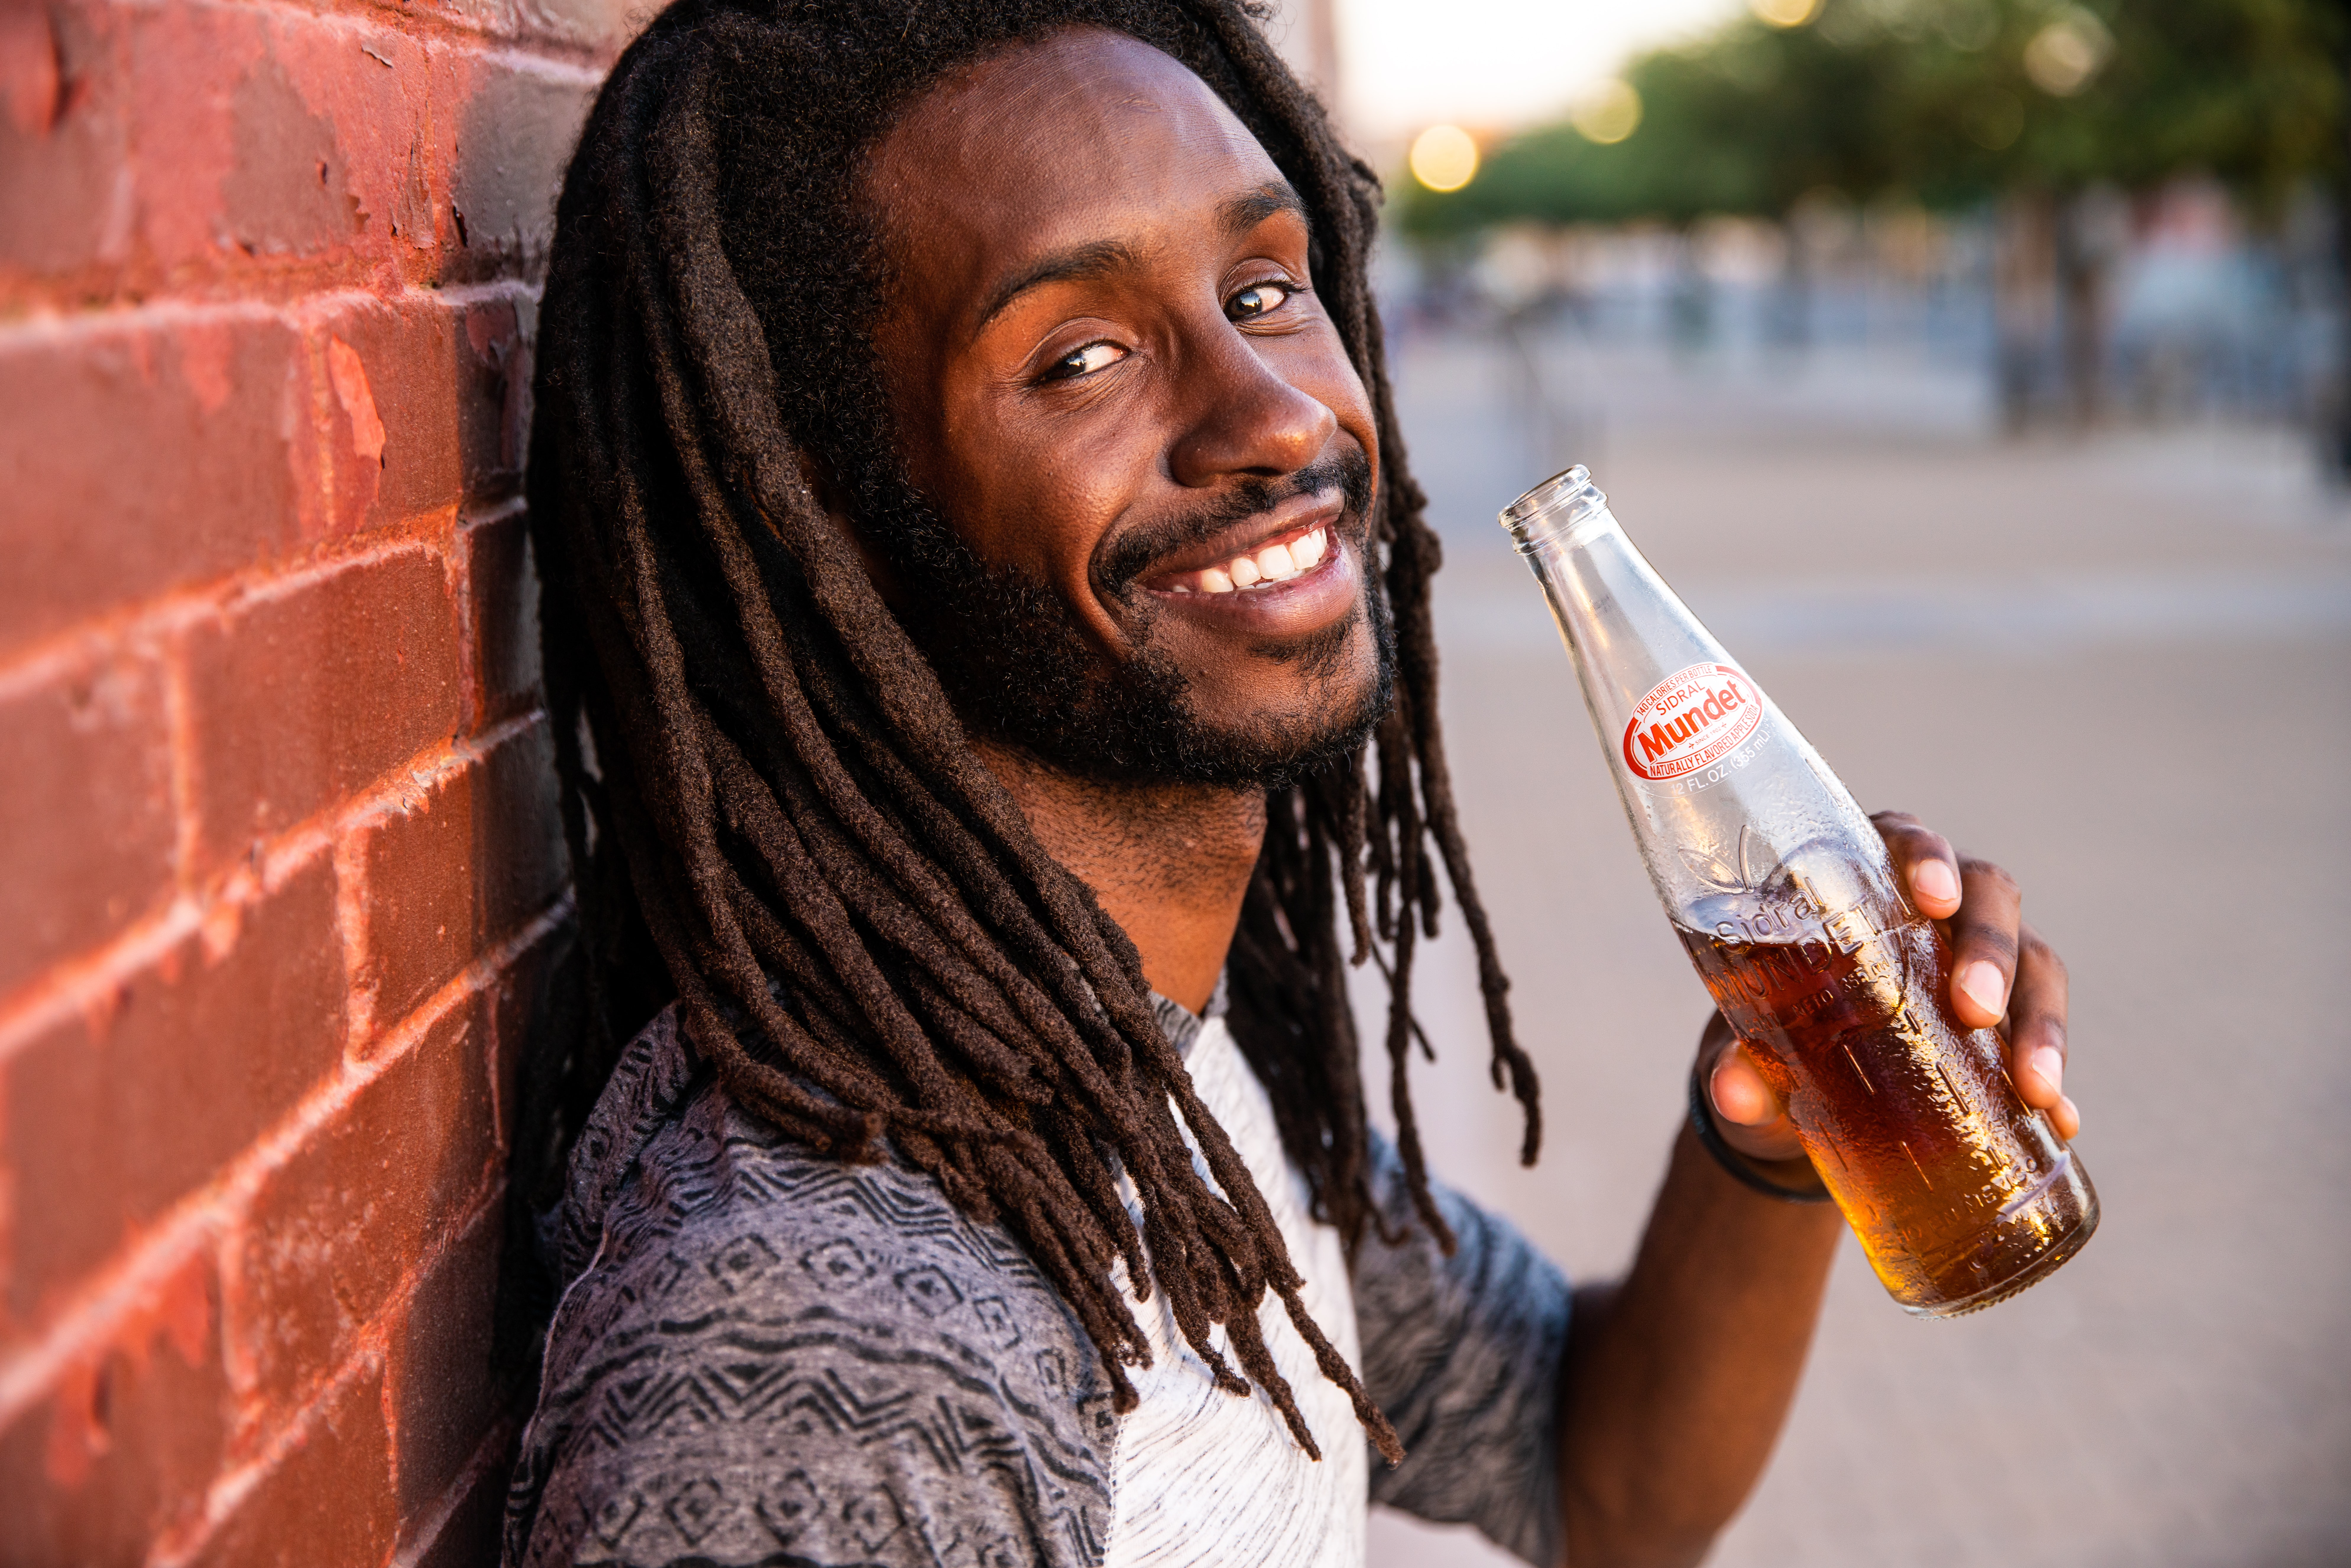 Smiling man sips on low-alcohol beer drink.